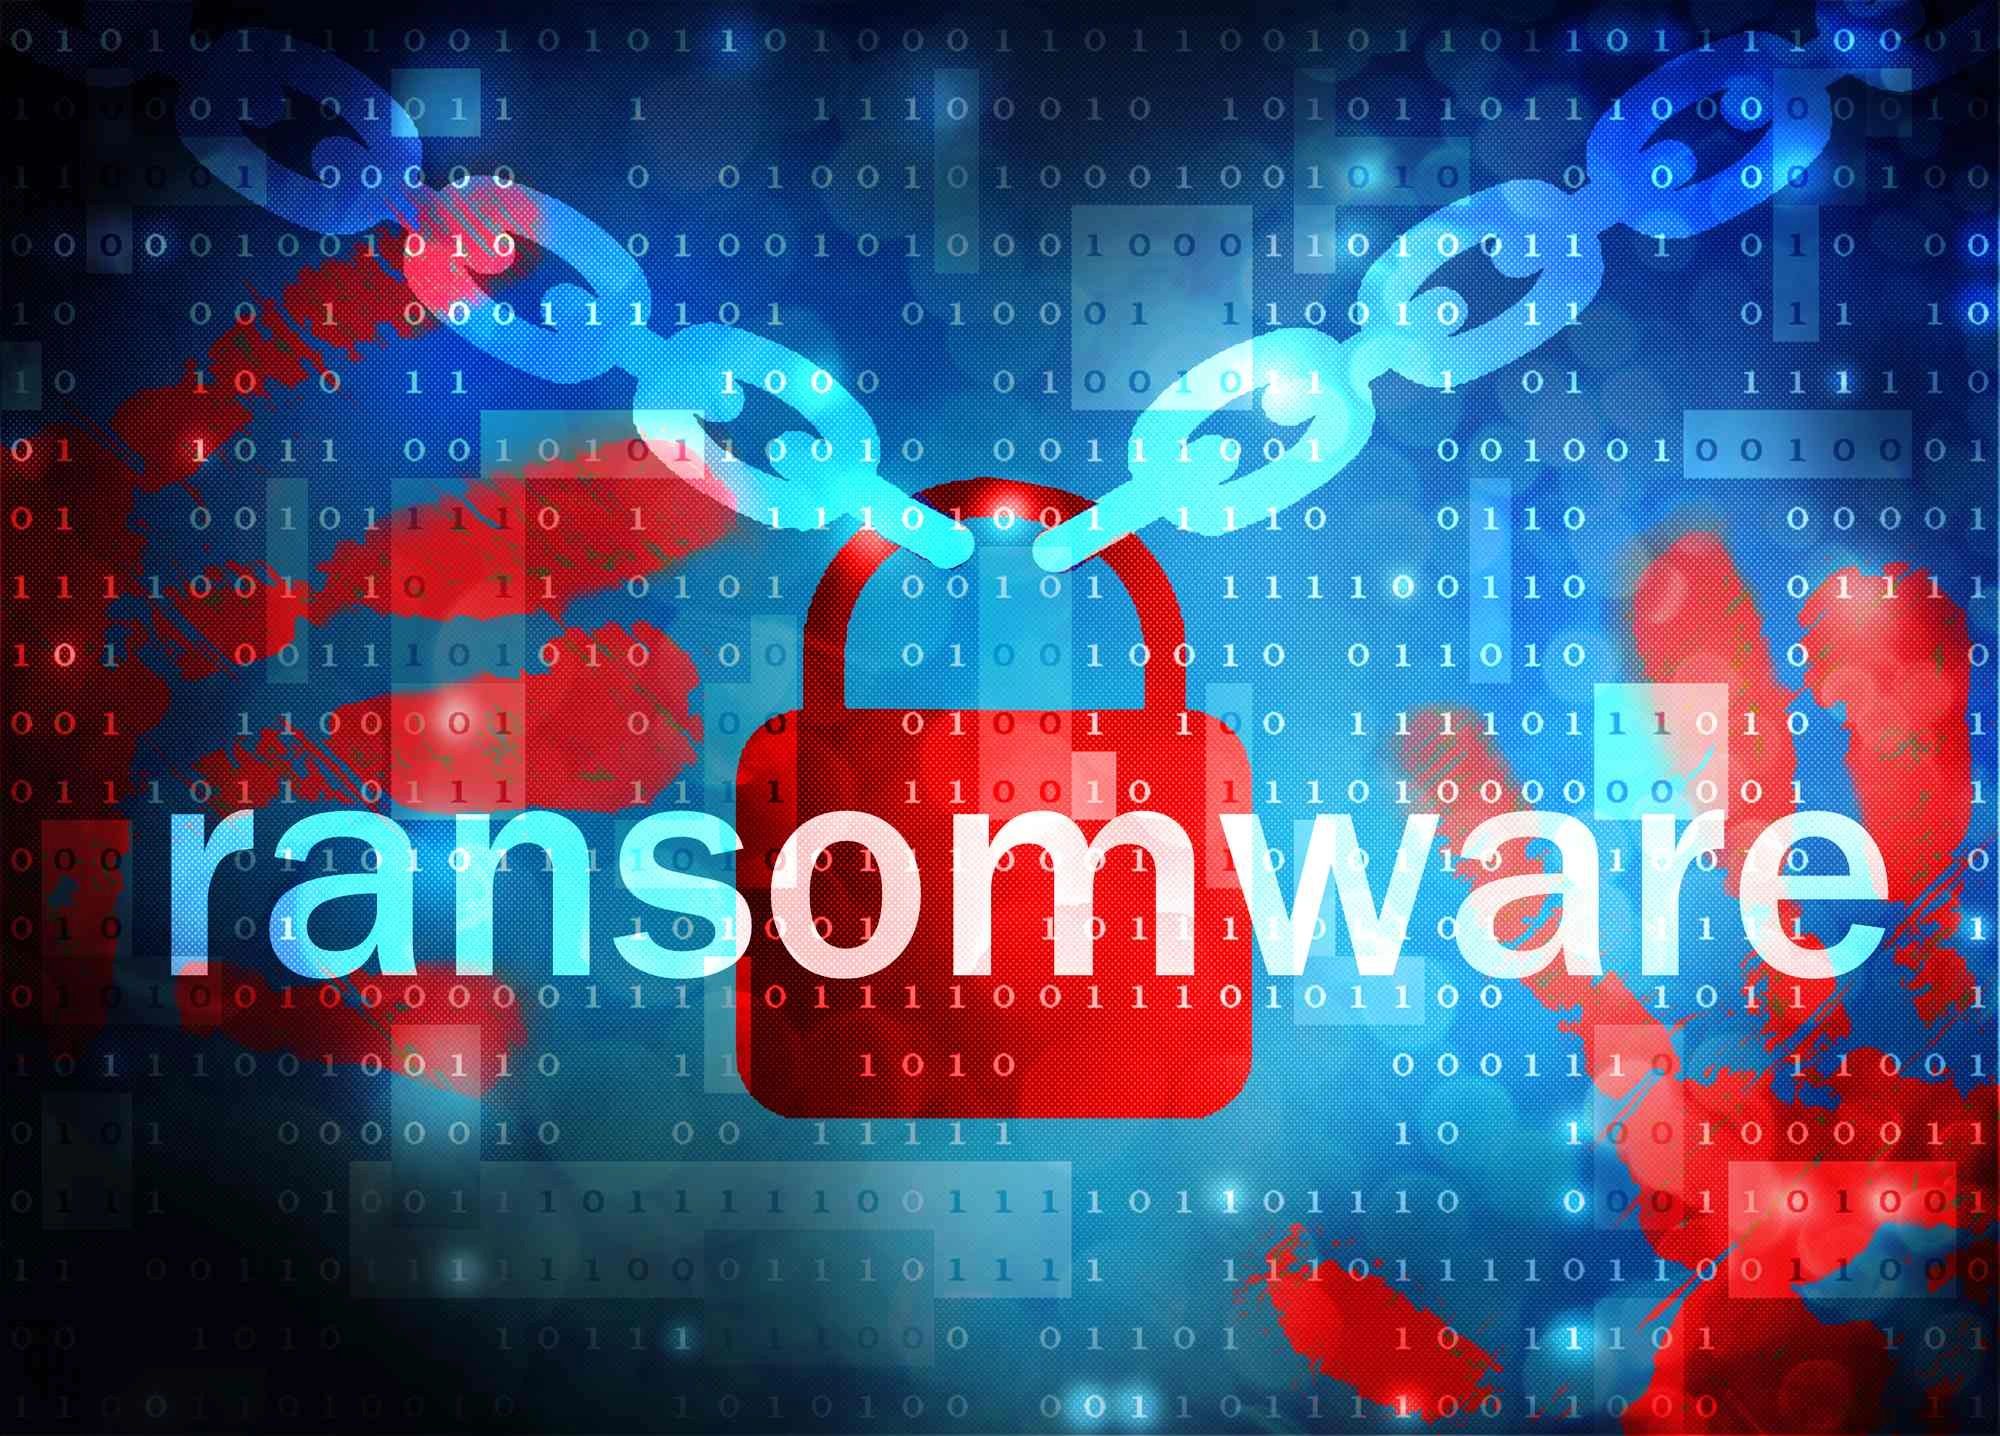 The ransomware threat is real: We can help!